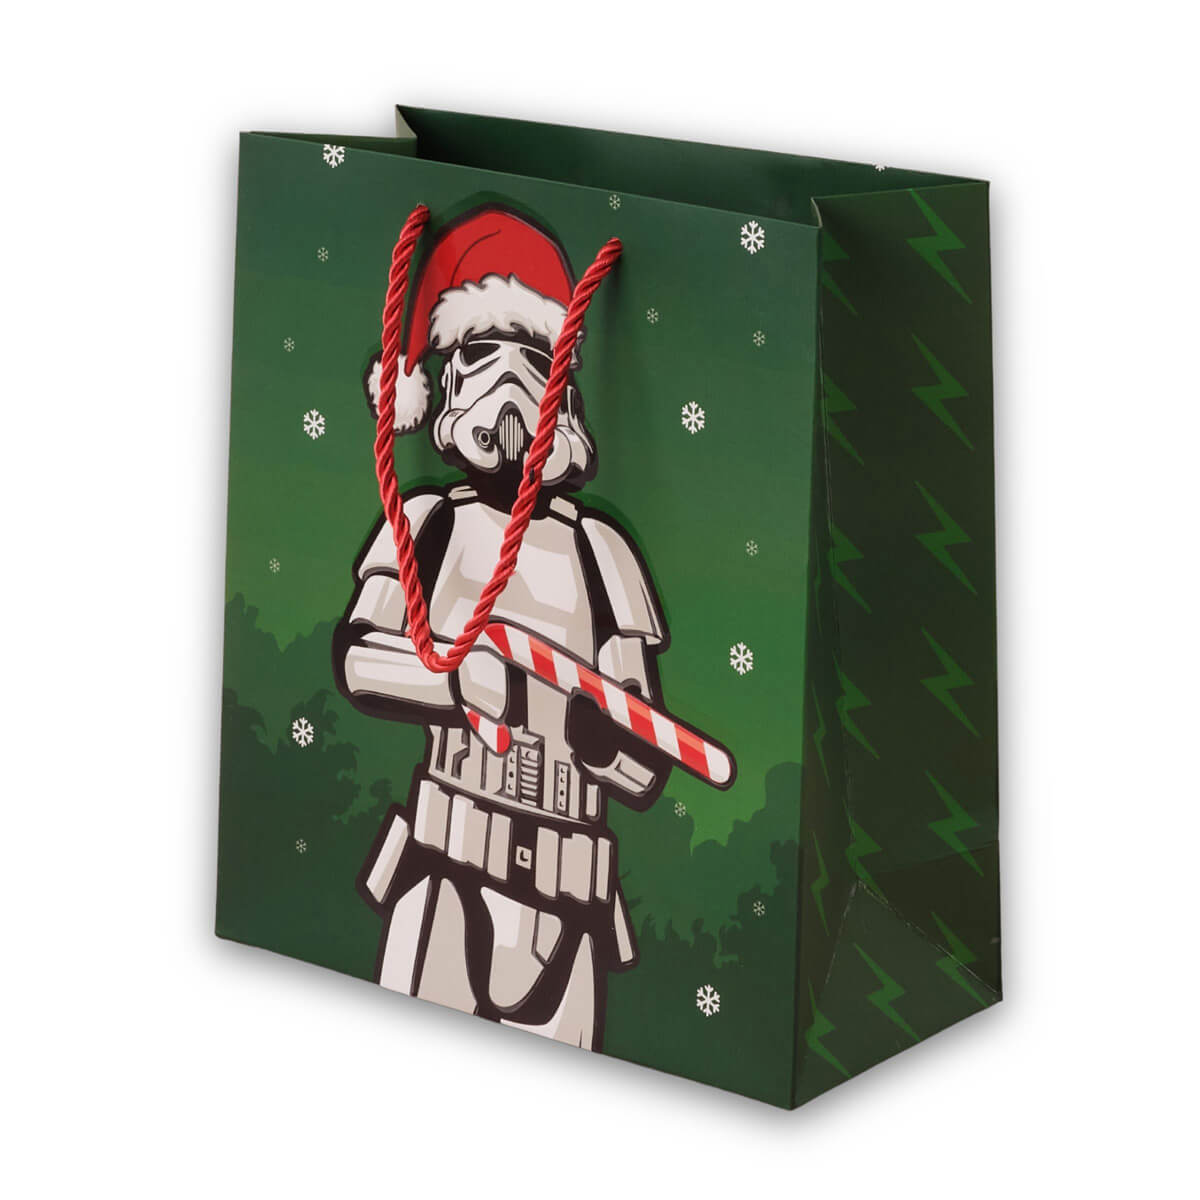 Original Stormtrooper Christmas Gift Bag - Medium sized - close up image showing green gift bag with a stormtrooper wearing a santa hat and holding a candy cane